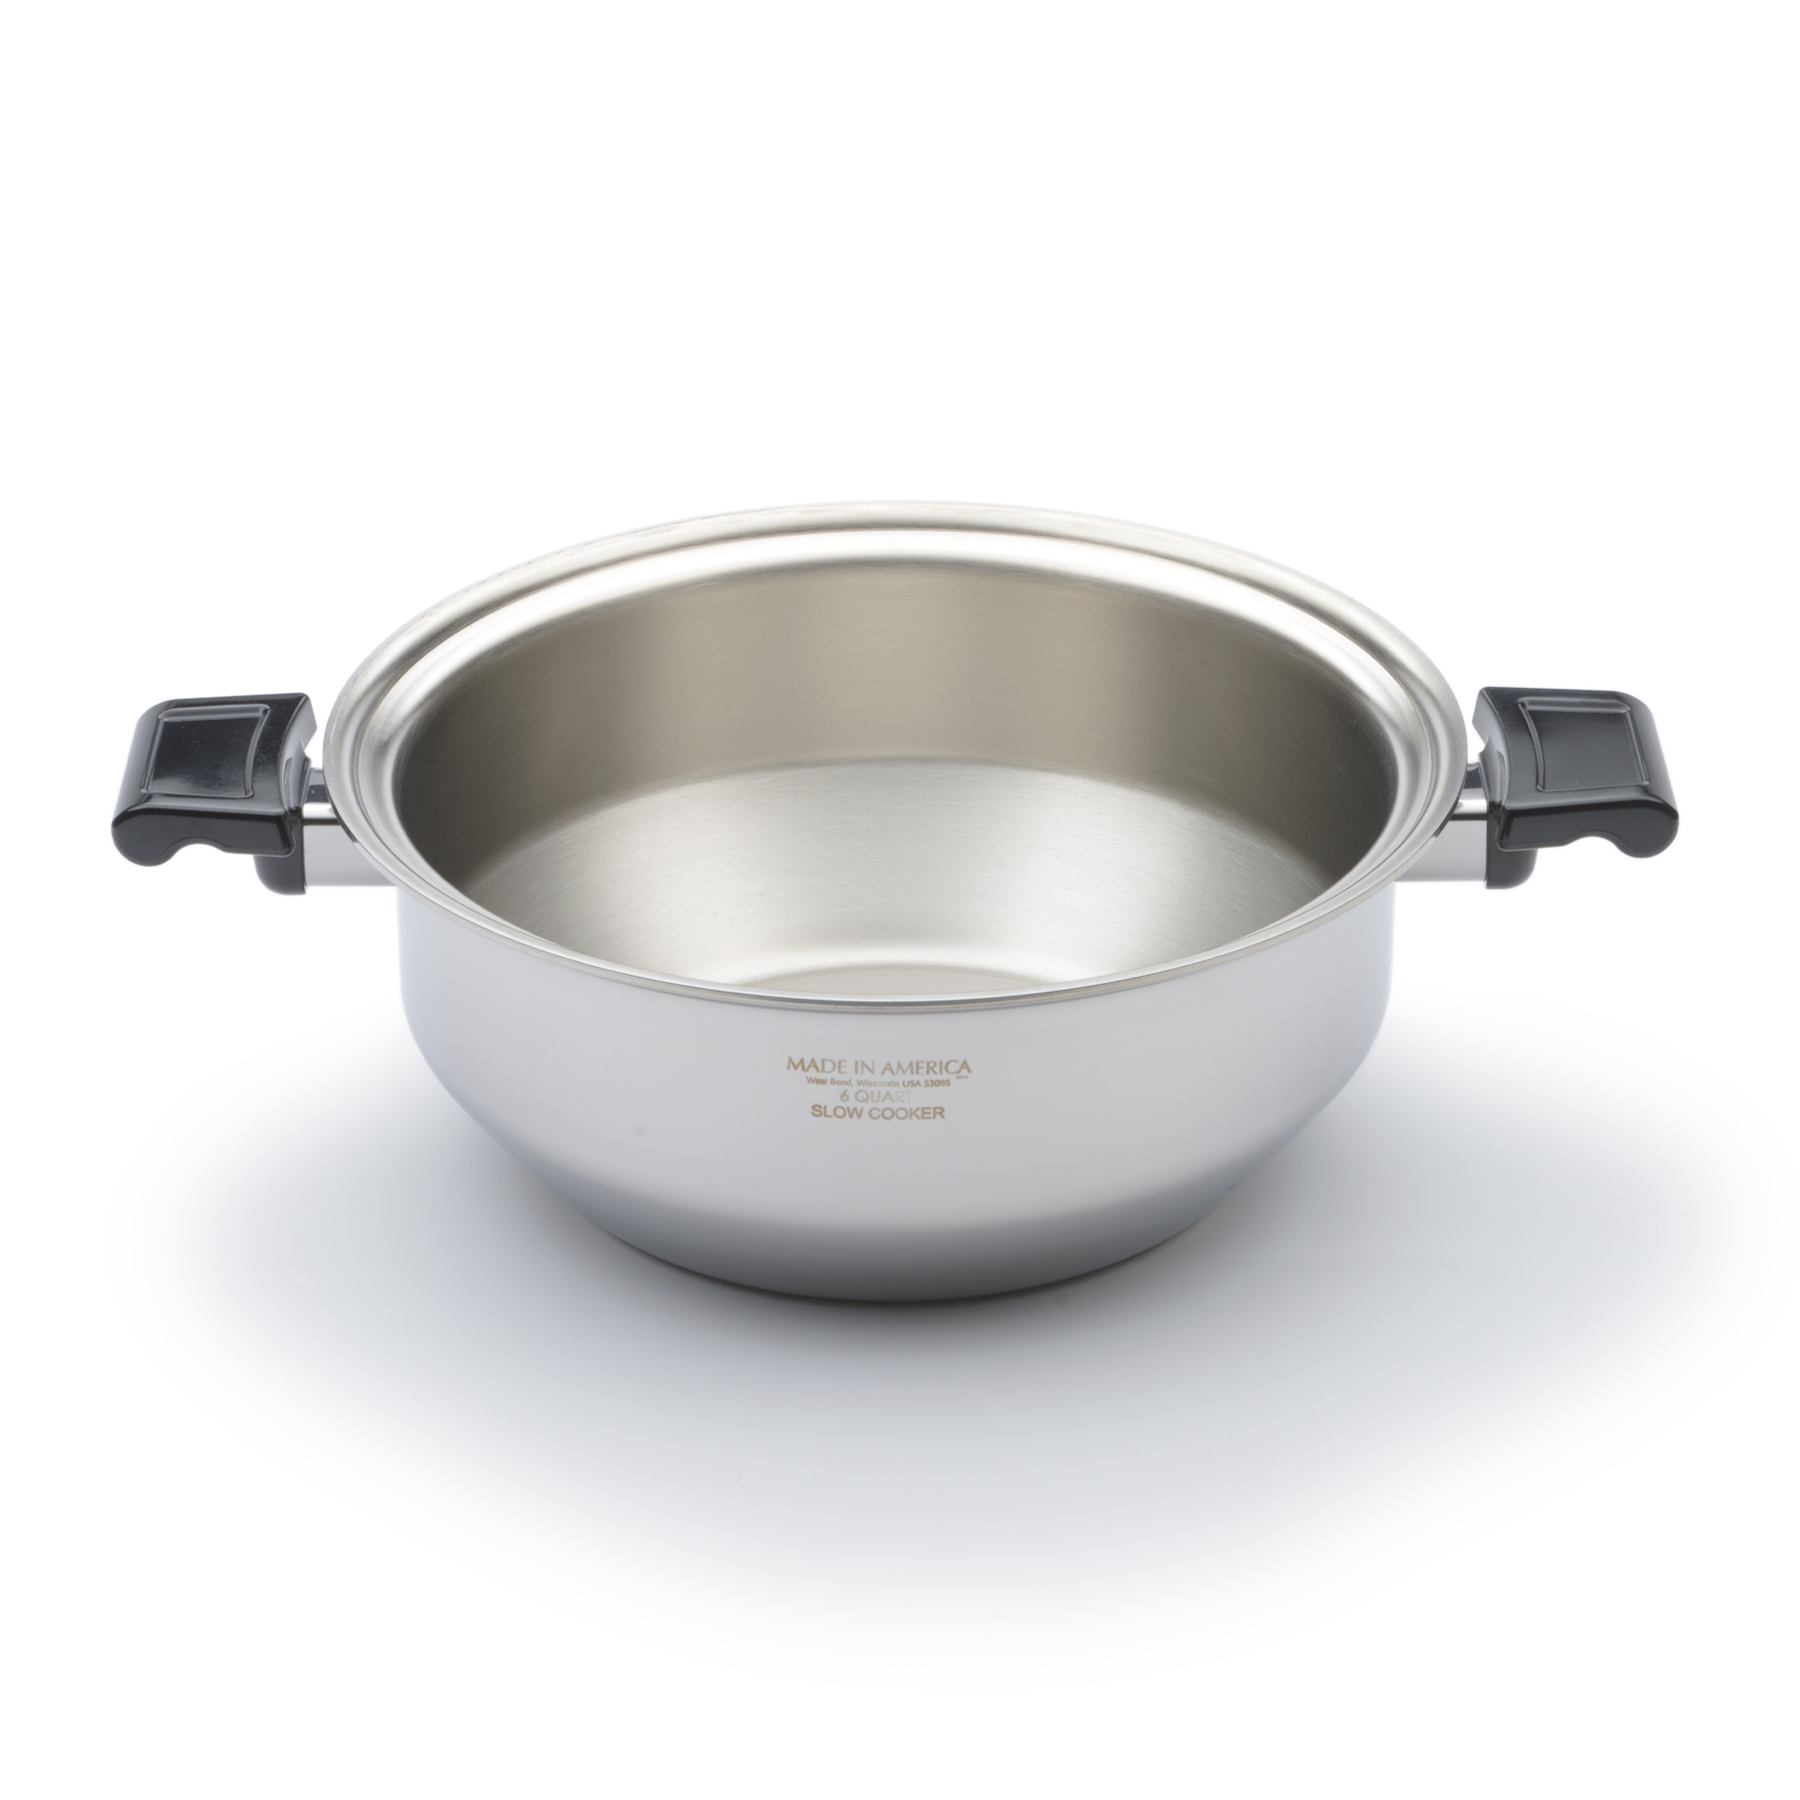 Stainless Steel 6 Quart Gourmet Stockpot with Cover with Slow Cooker -  Liberty Tabletop